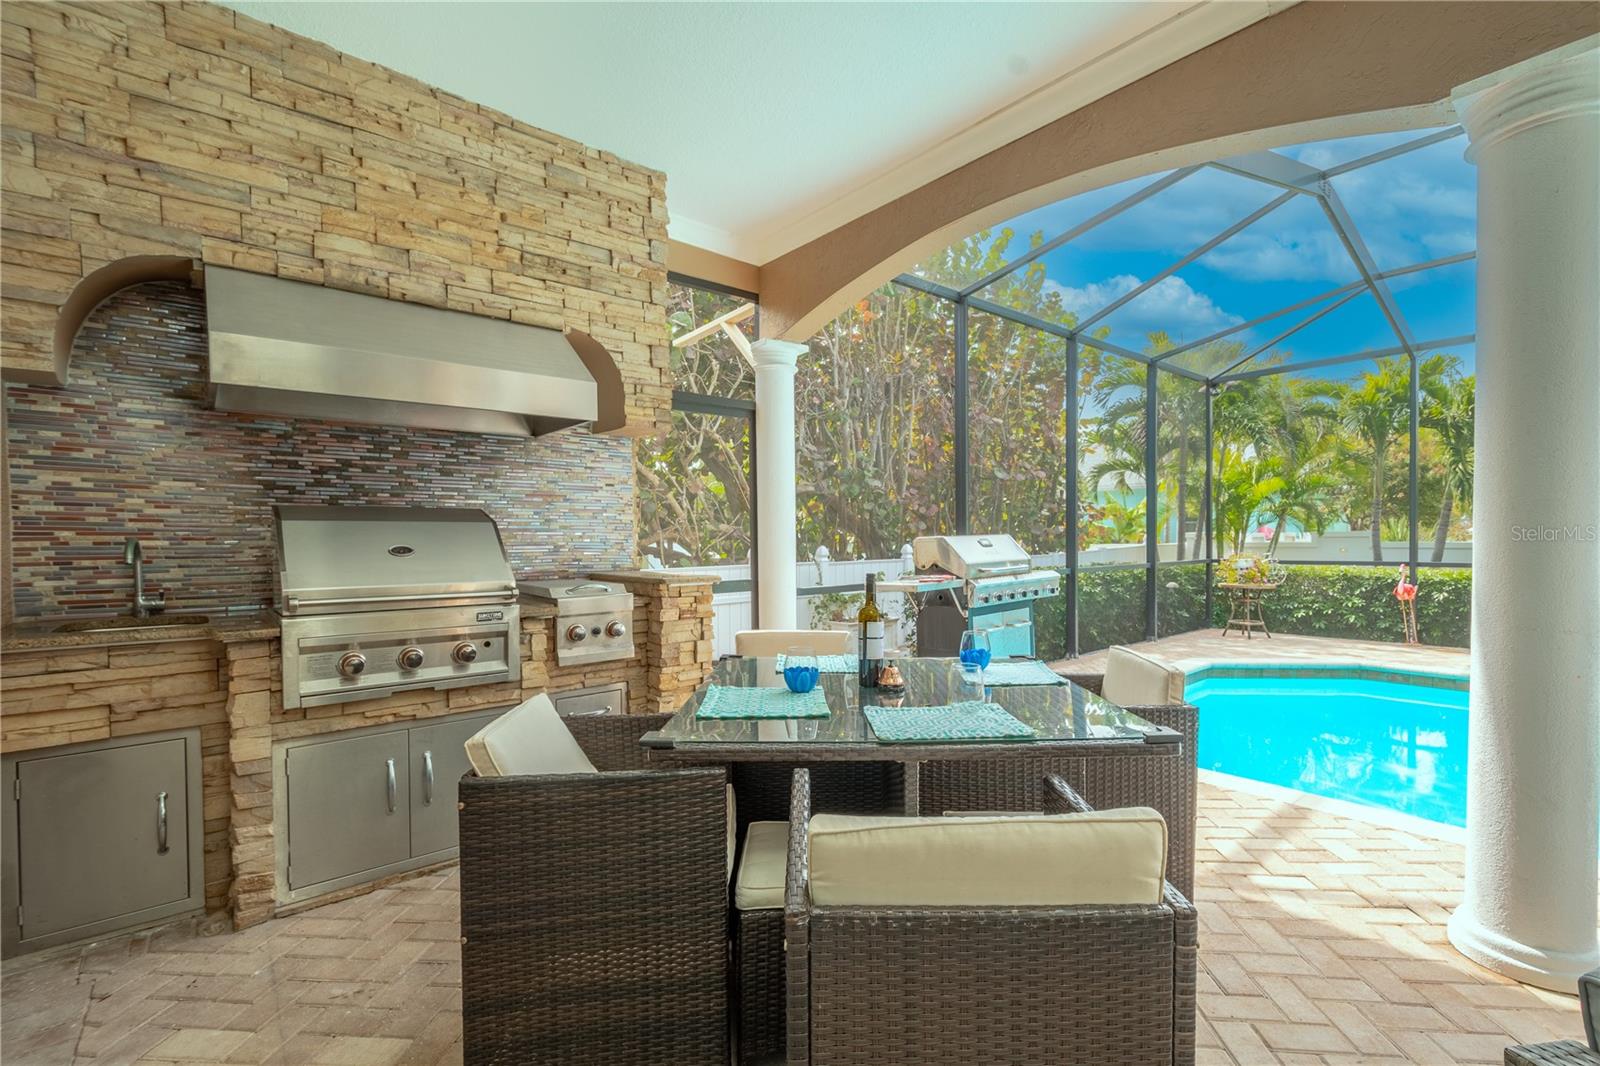 The covered patio has plenty of room for all of your outdoor furniture.